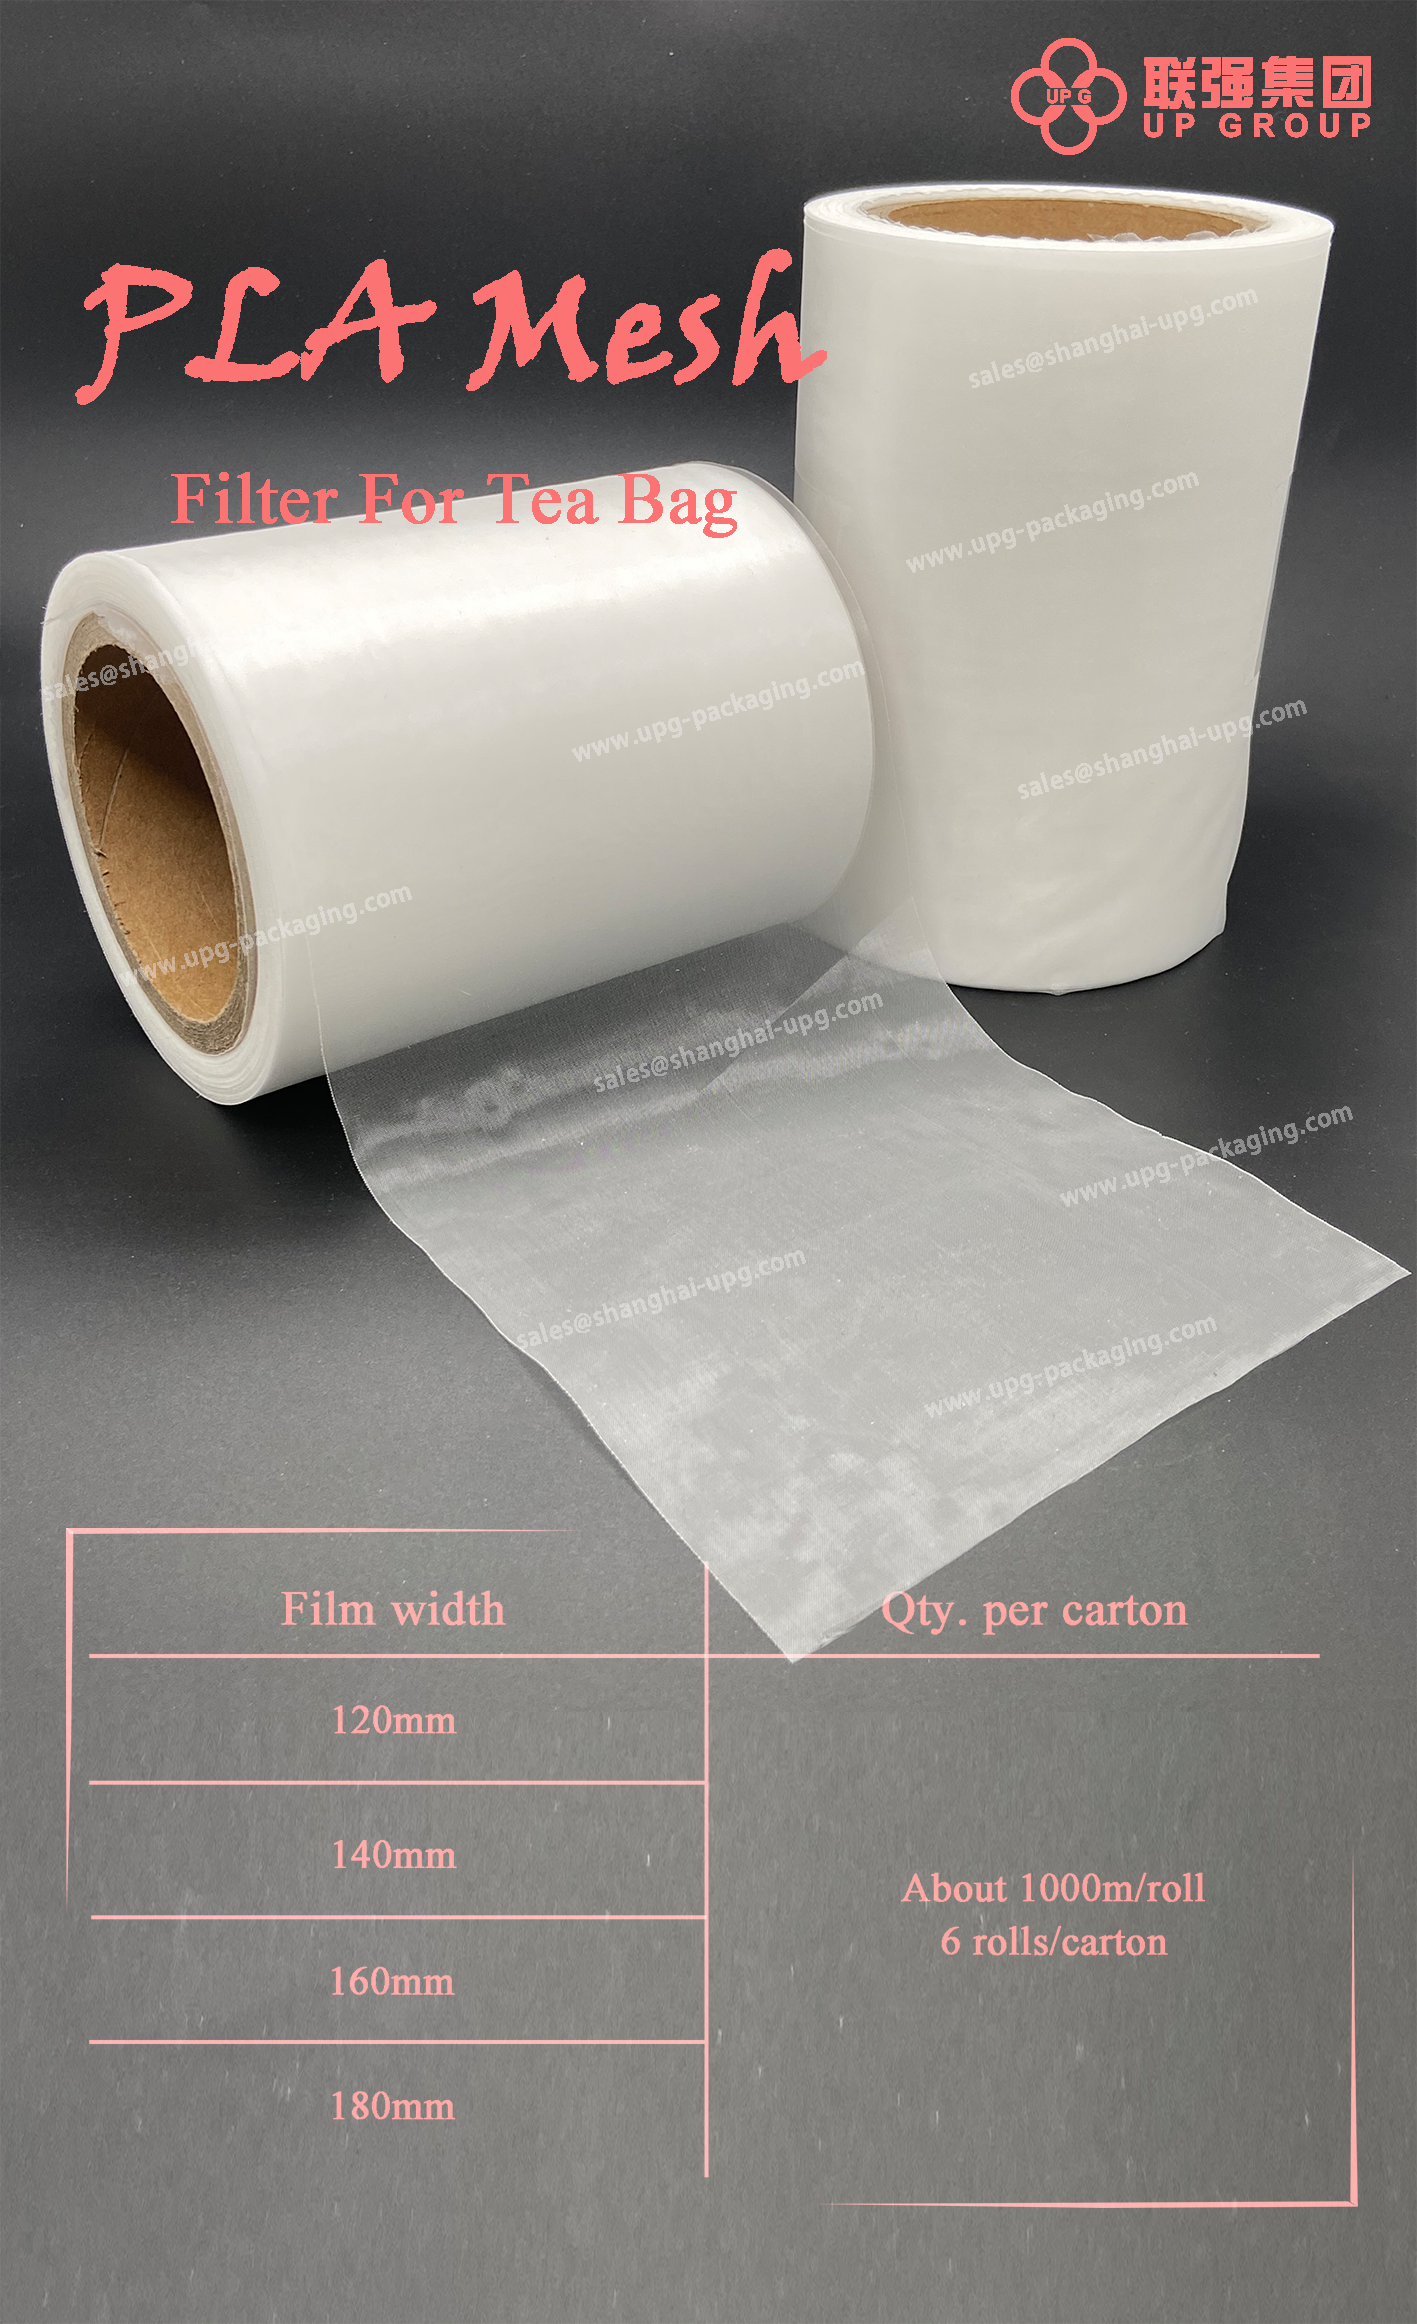 Filter without label + 参数 水印